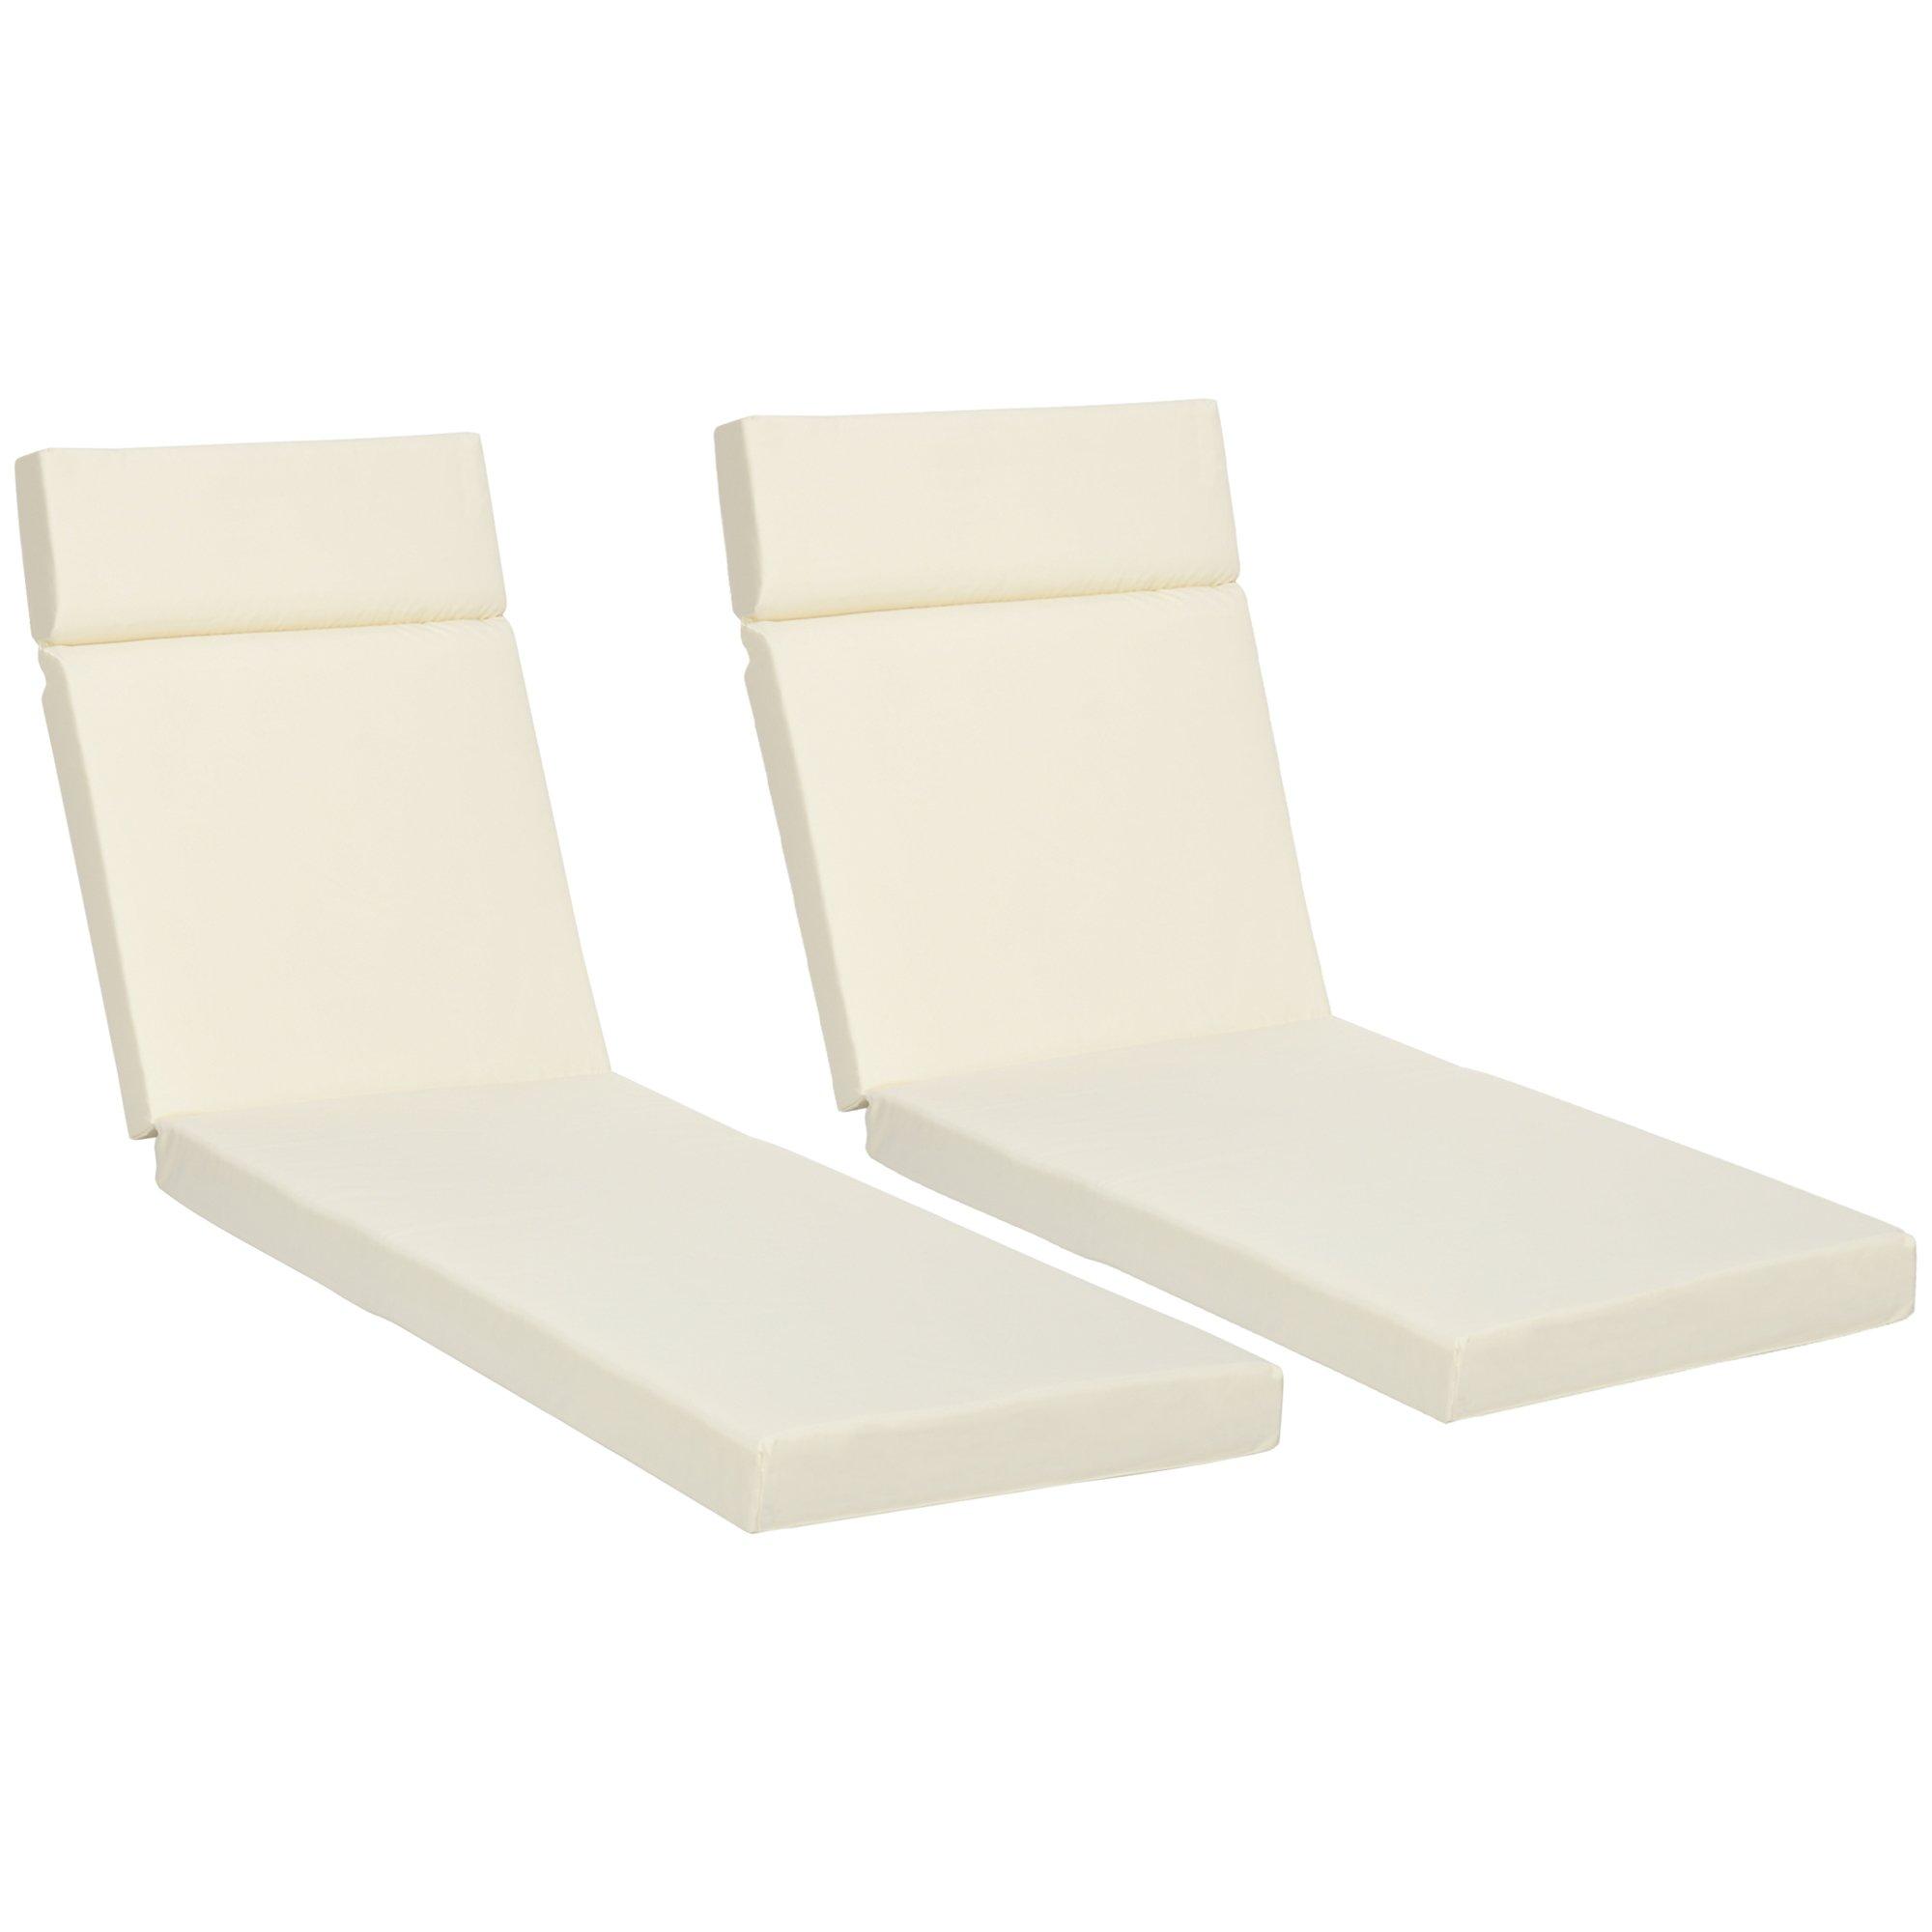 Set of 2 Lounger Cushions Deep Seat Patio Cushions with Ties